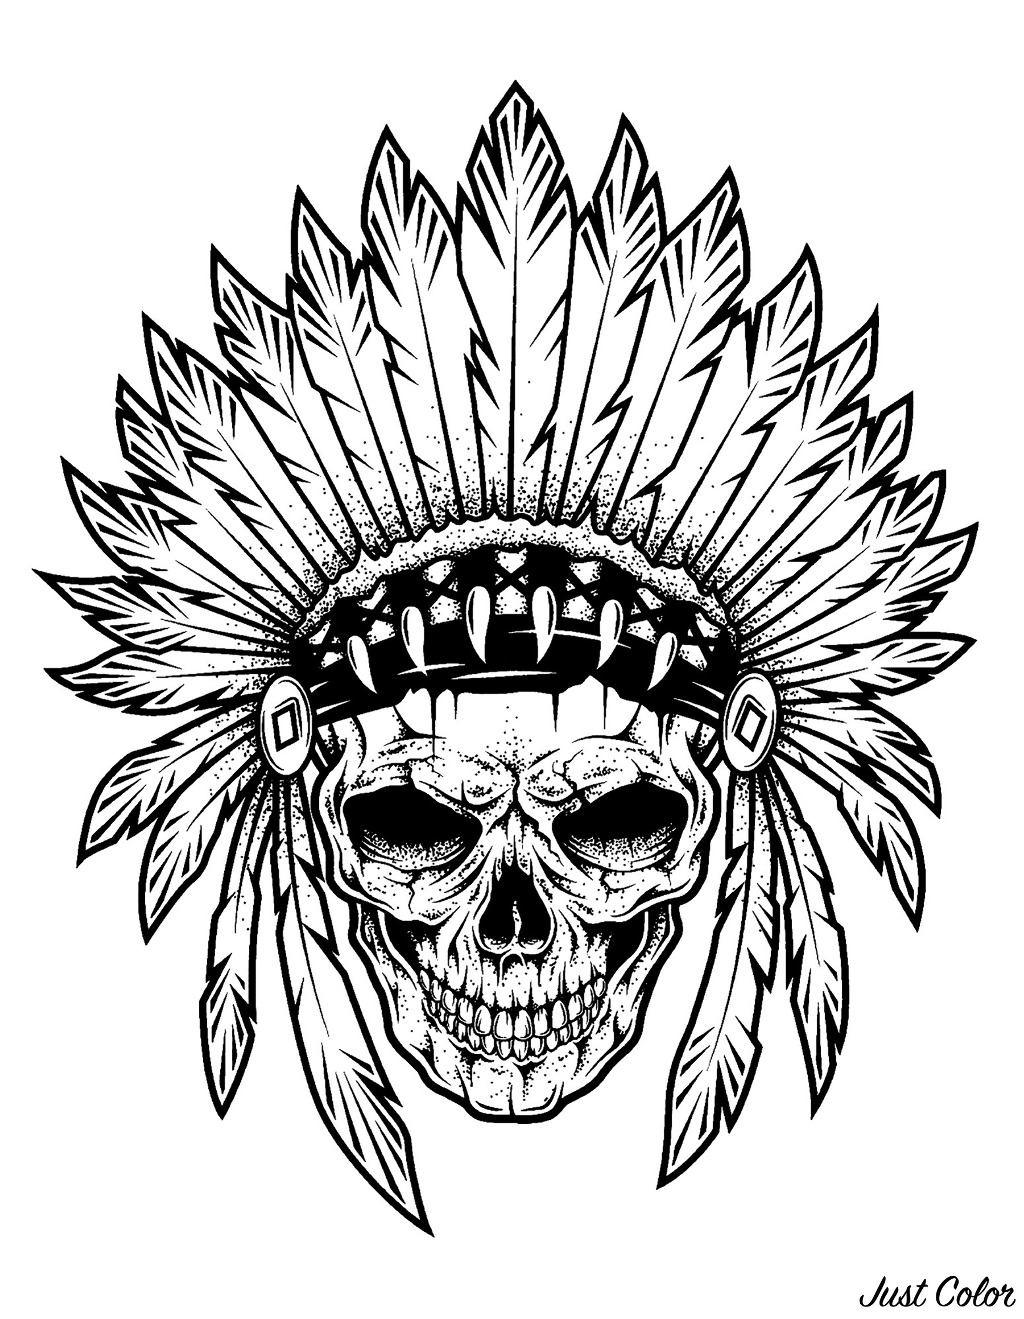 Tattoo indian chief skull - Tattoos Adult Coloring Pages